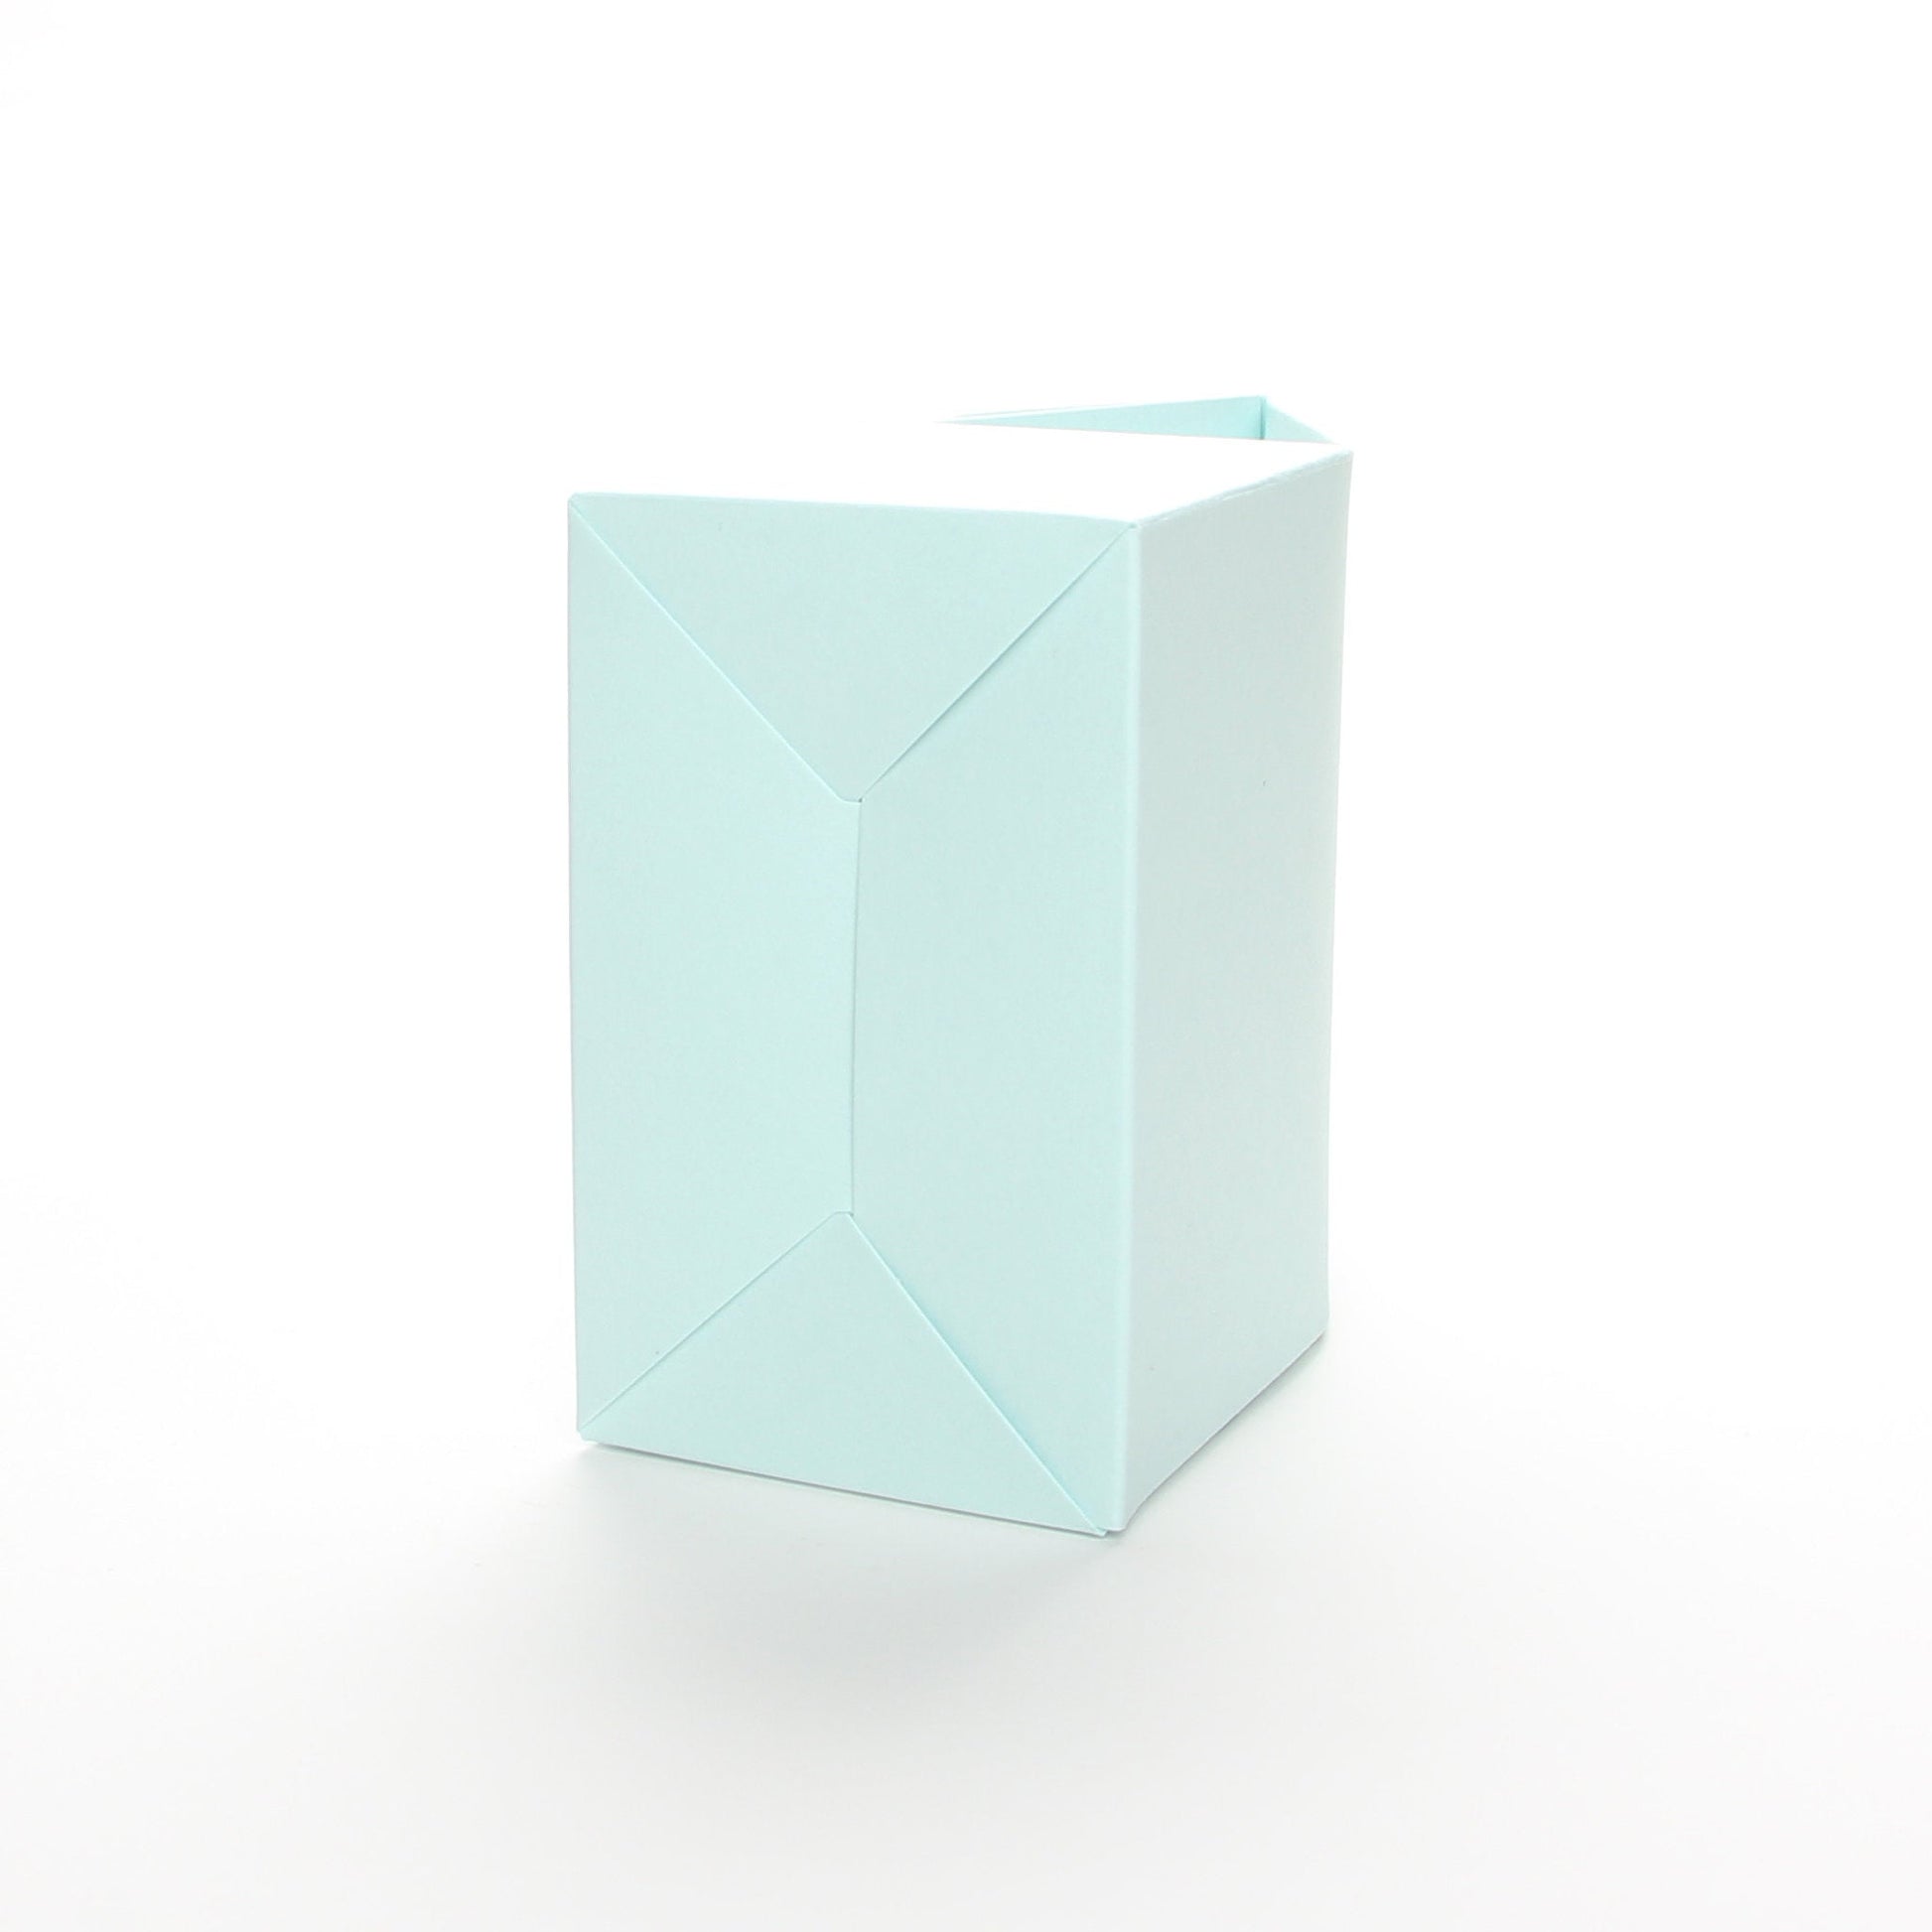 Bottom view of Lux Party’s light blue favor box on a white background.